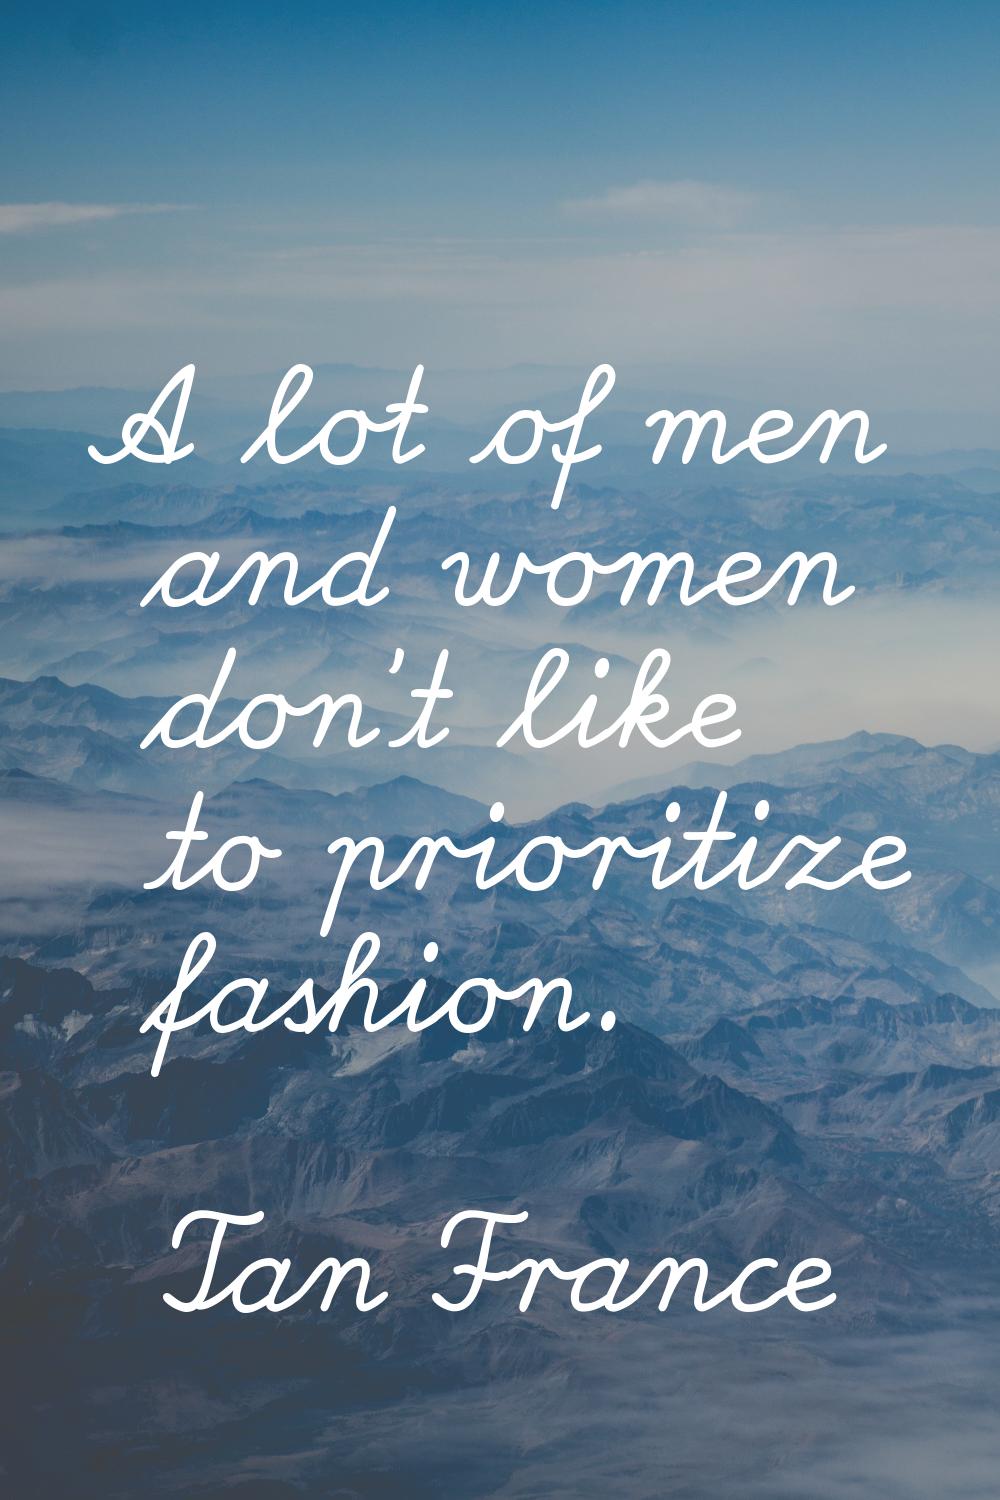 A lot of men and women don't like to prioritize fashion.